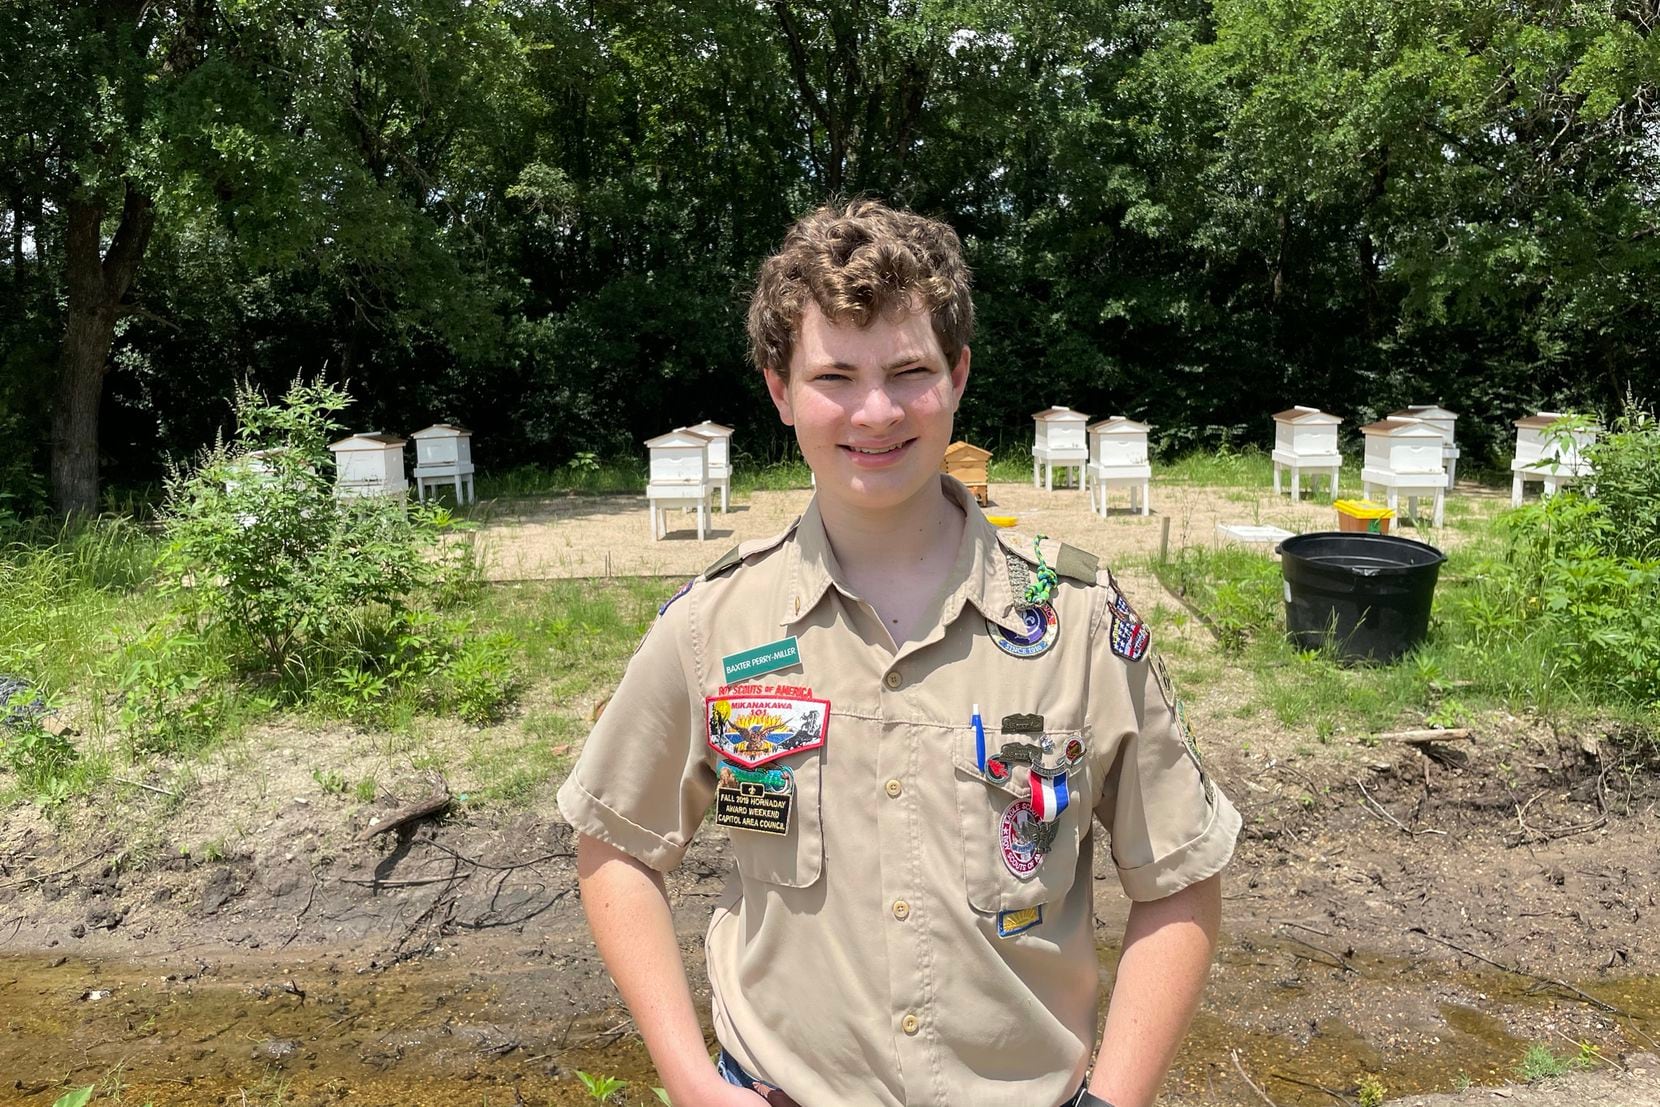 Passion for the environment fuels a Dallas Boy Scout’s conservation award